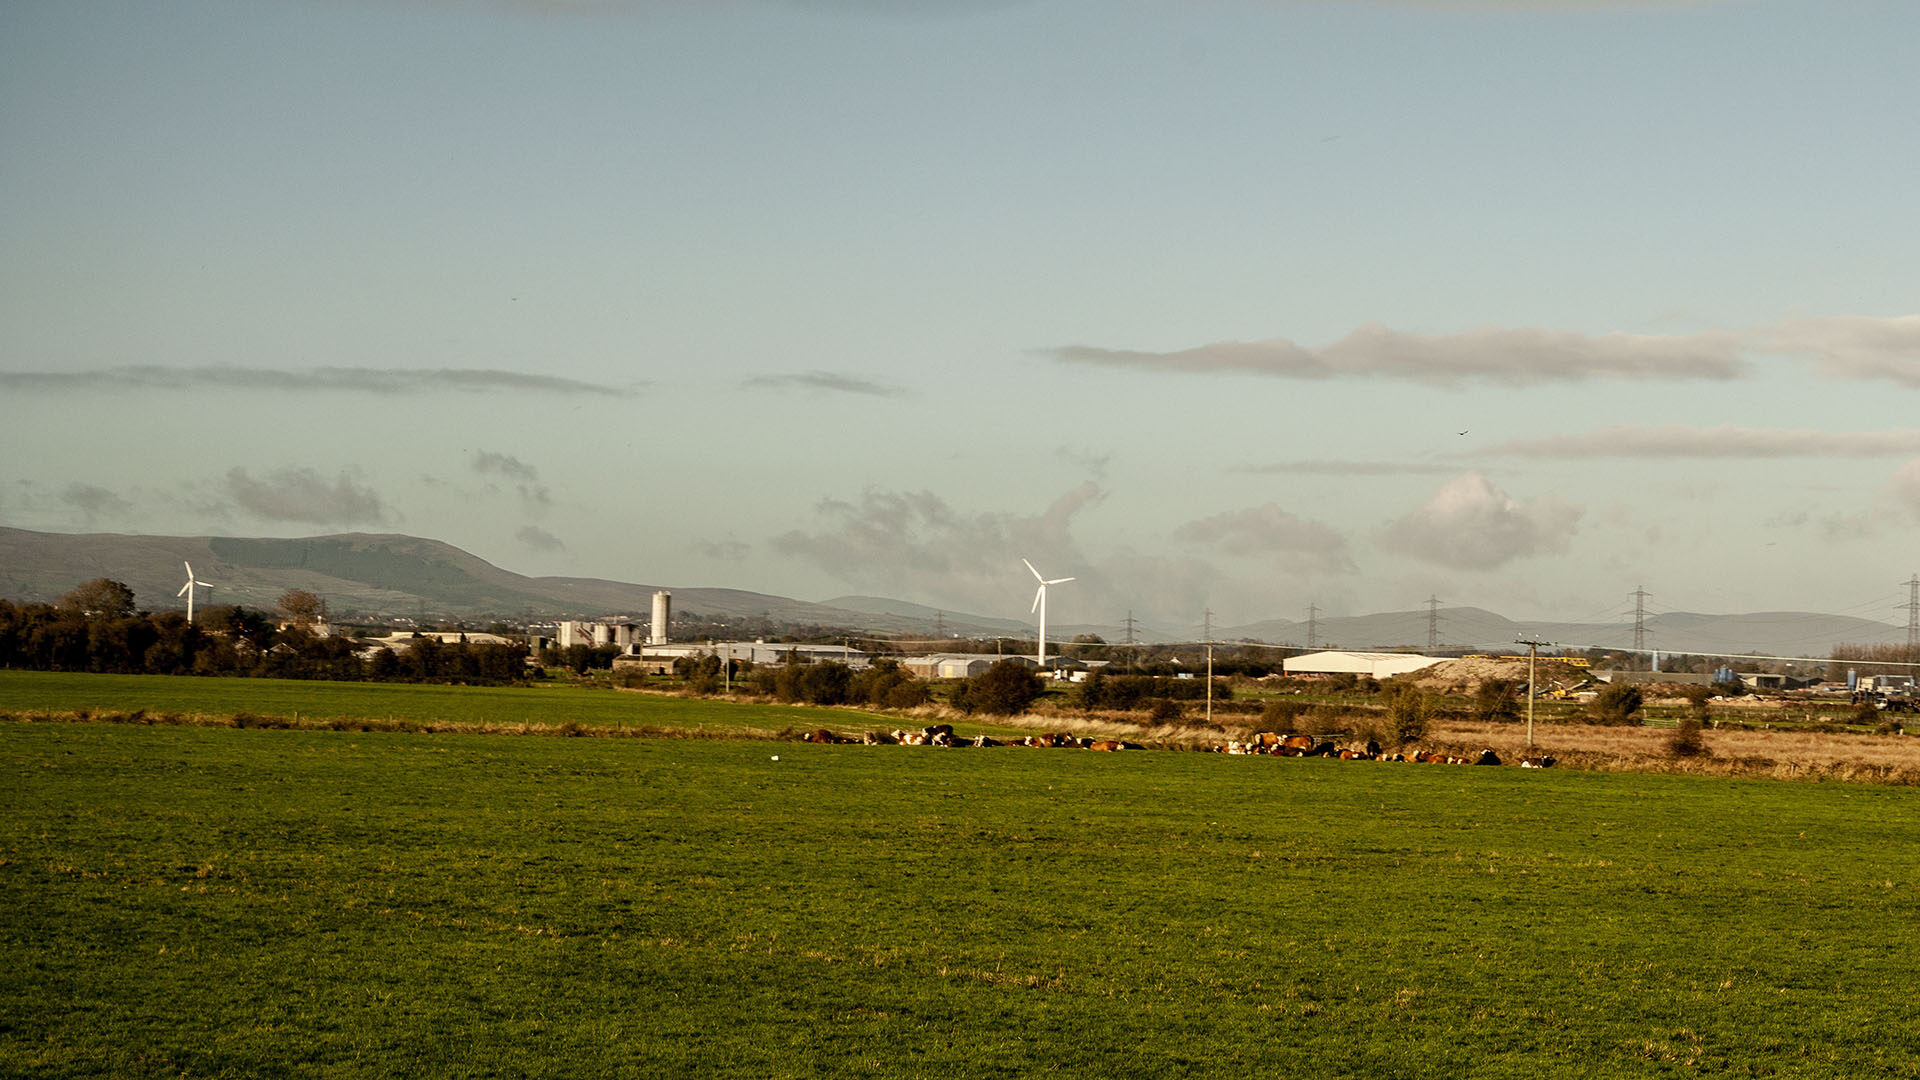 Overview of the land around the former airfield at Toome, Co. Antrim looking toward the site of runways and hardstandings.